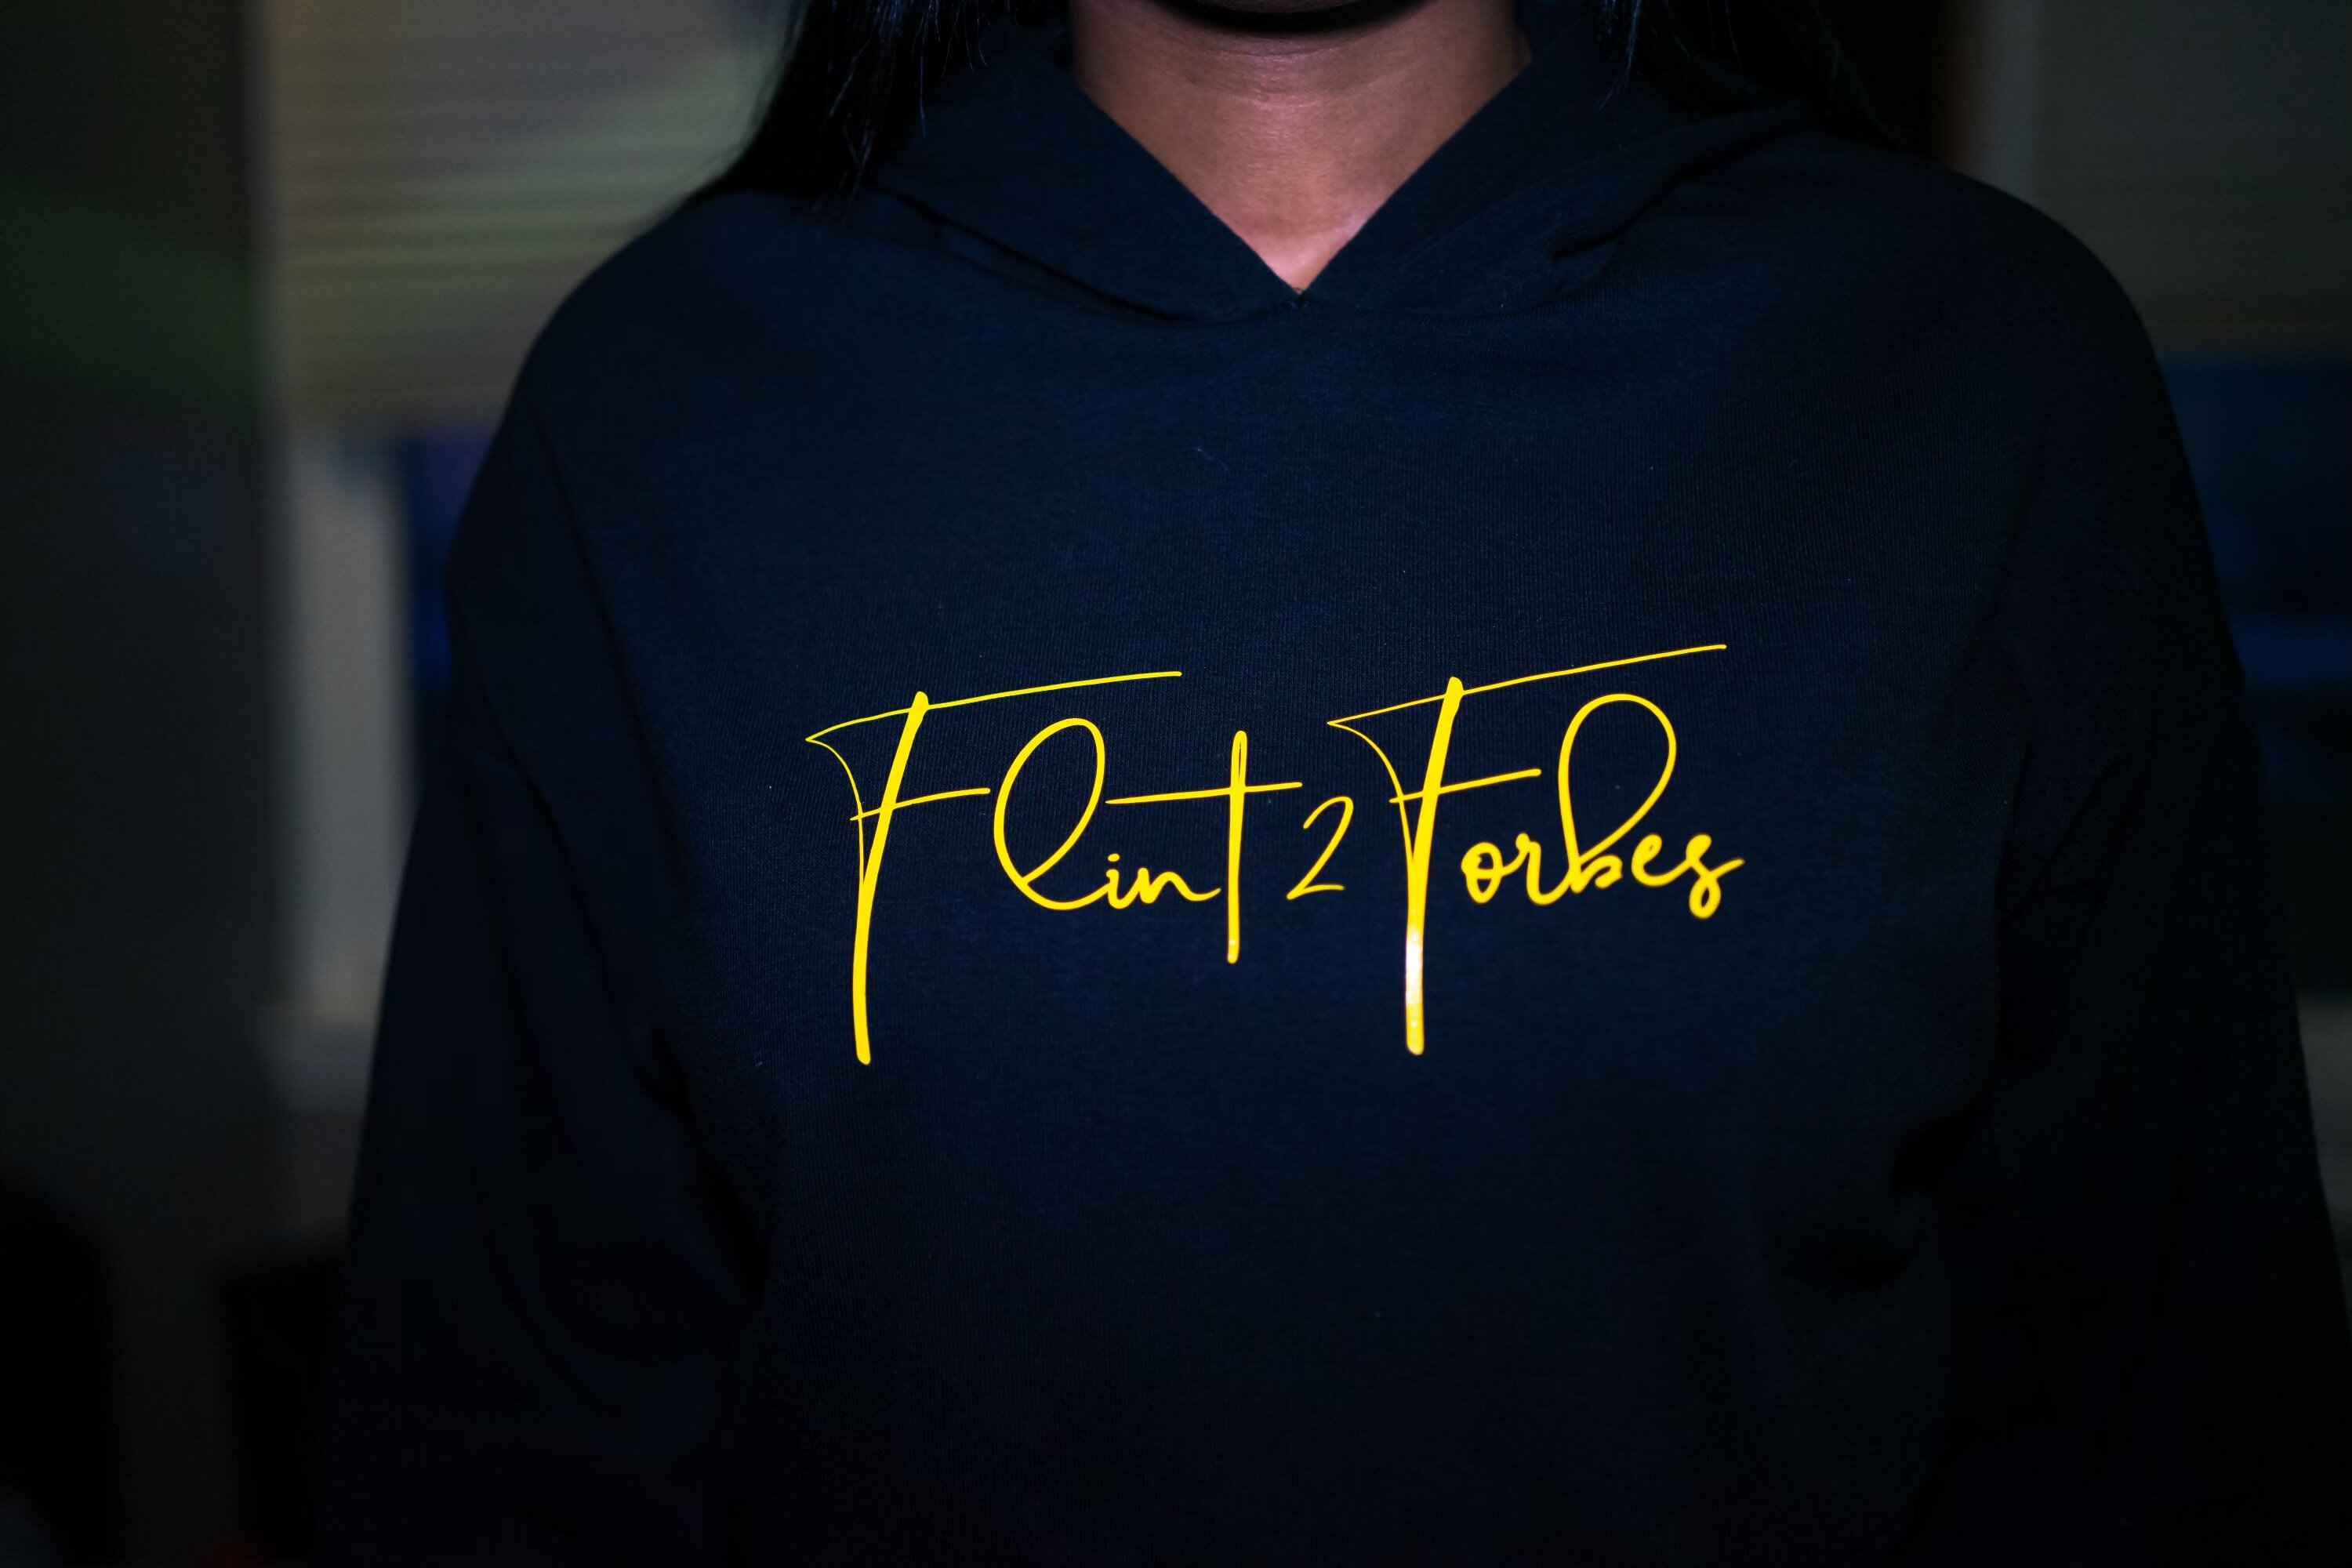 Flint 2 Forbes - a co-collaboration to change Flint's mentality and inspire hope.